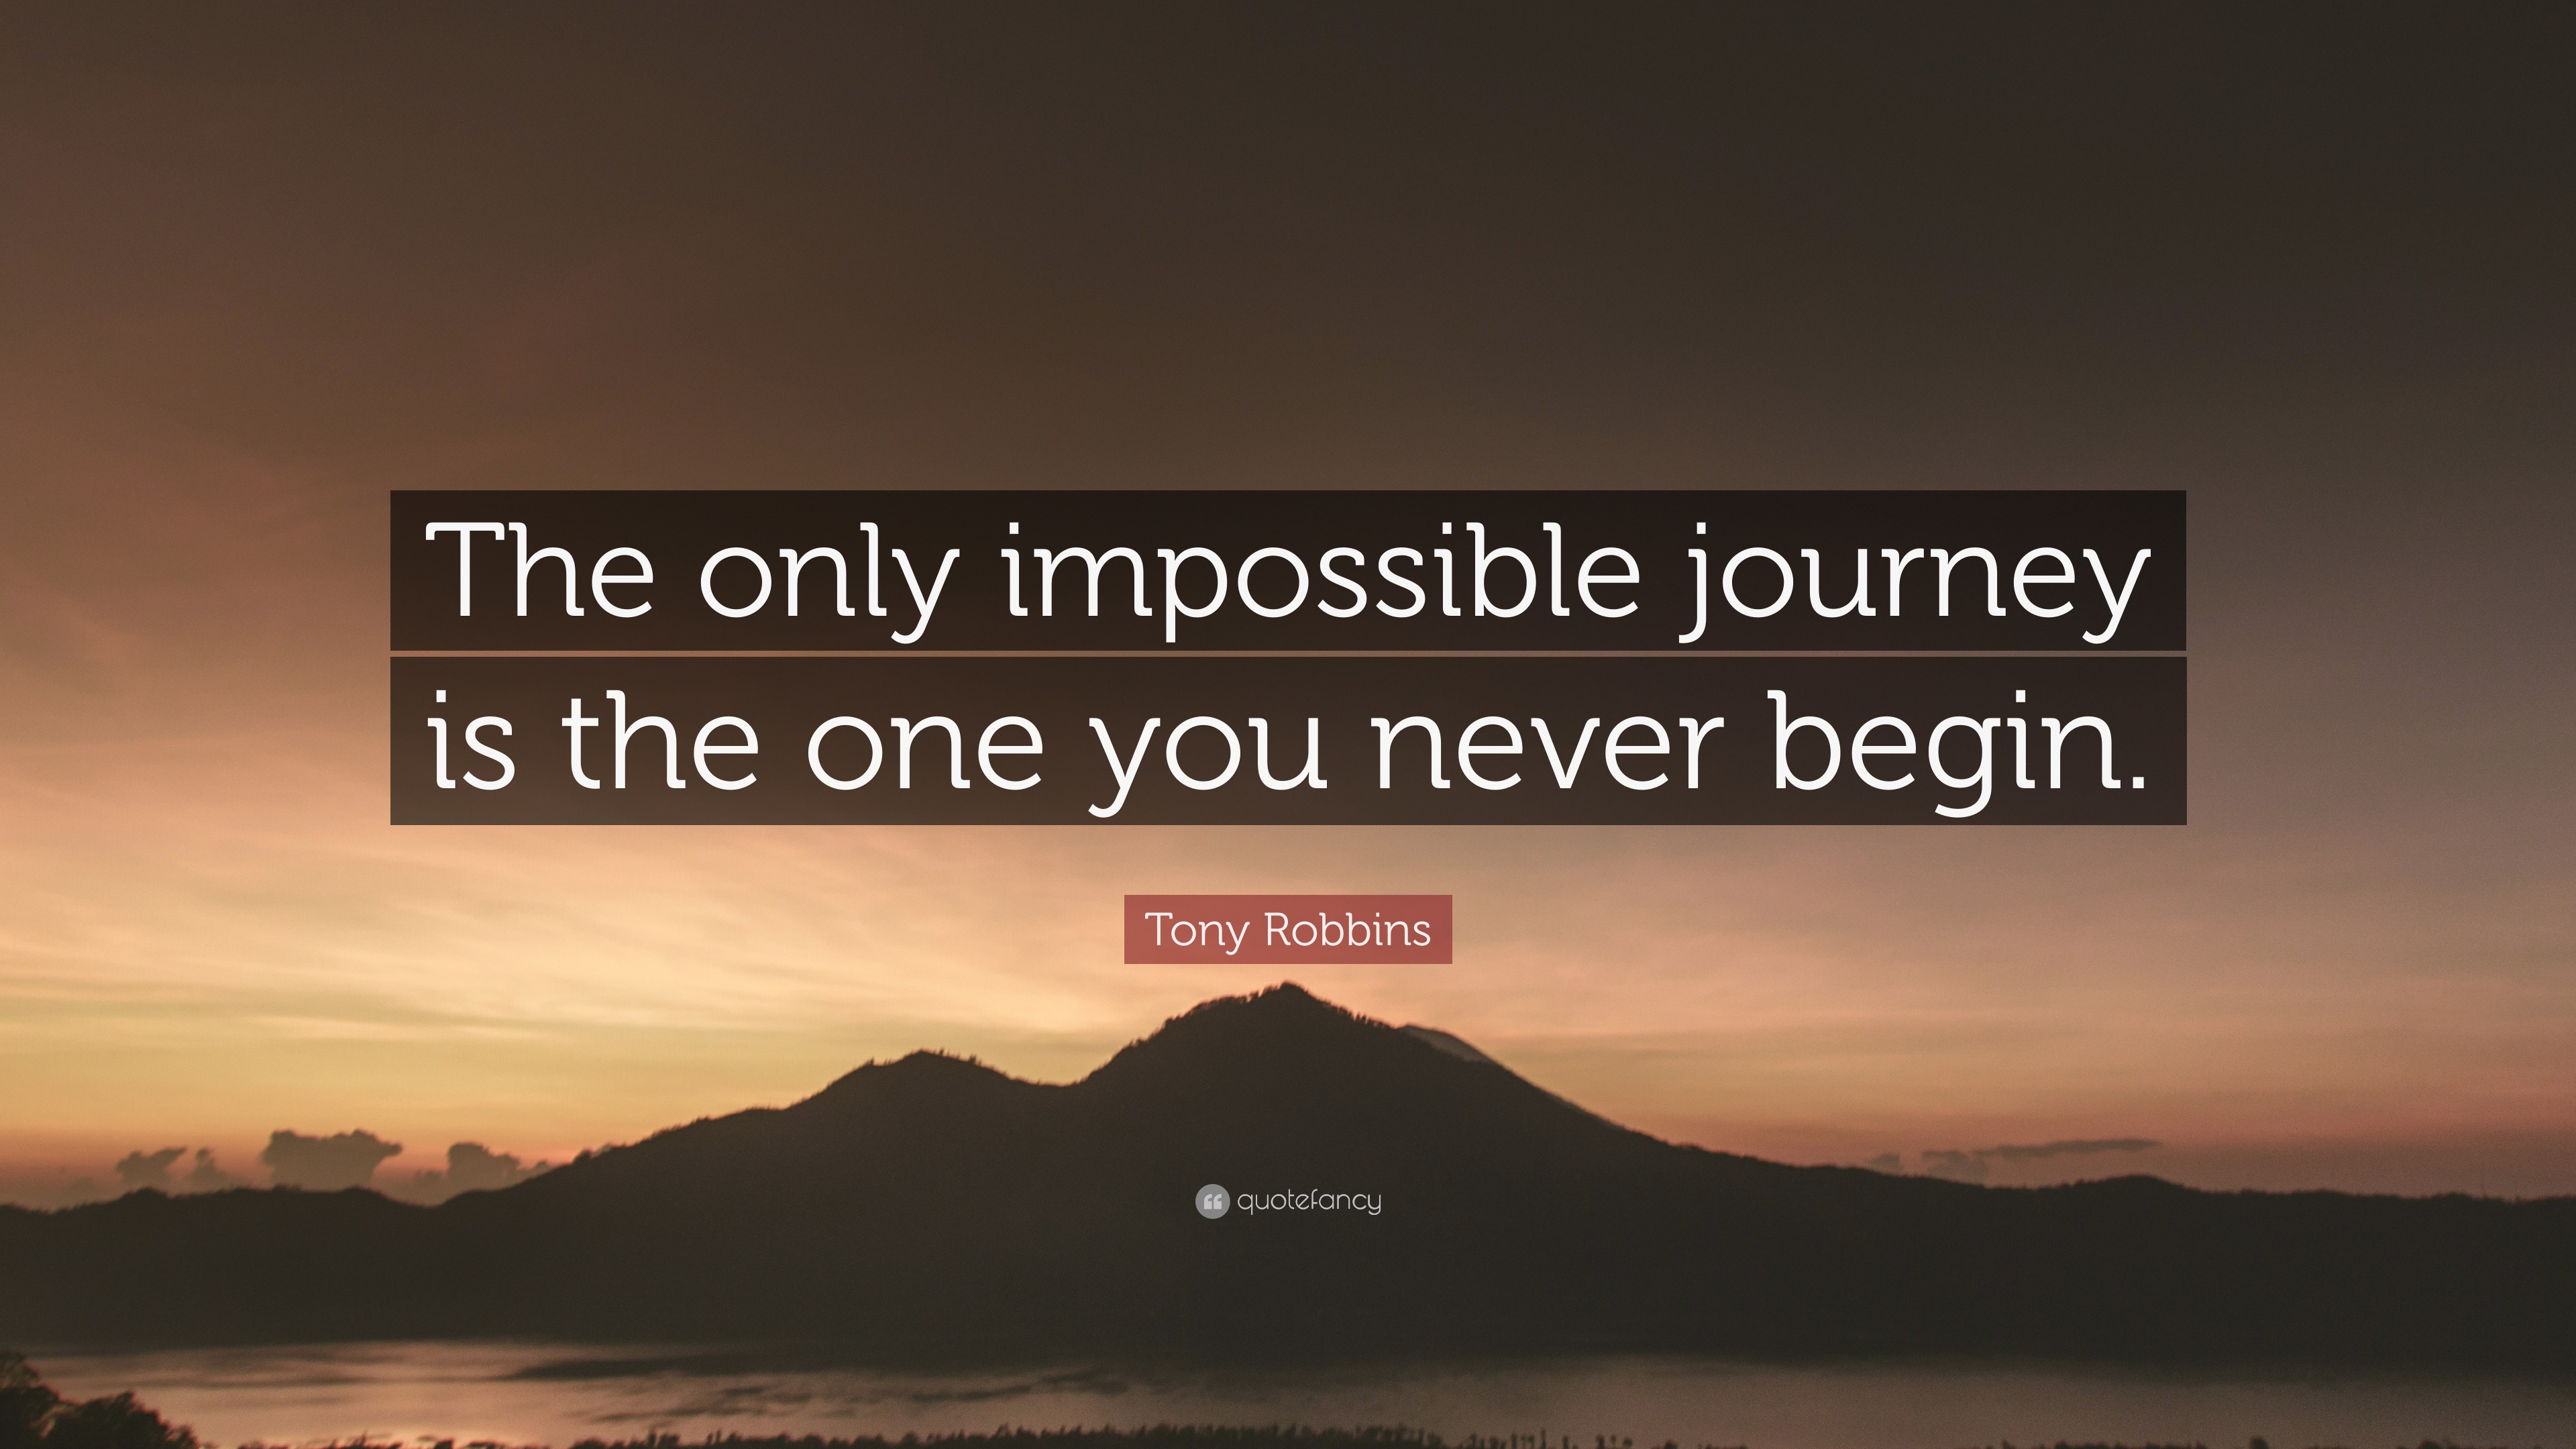 Tony Robbins Quote: “The only impossible journey is the one you never ...